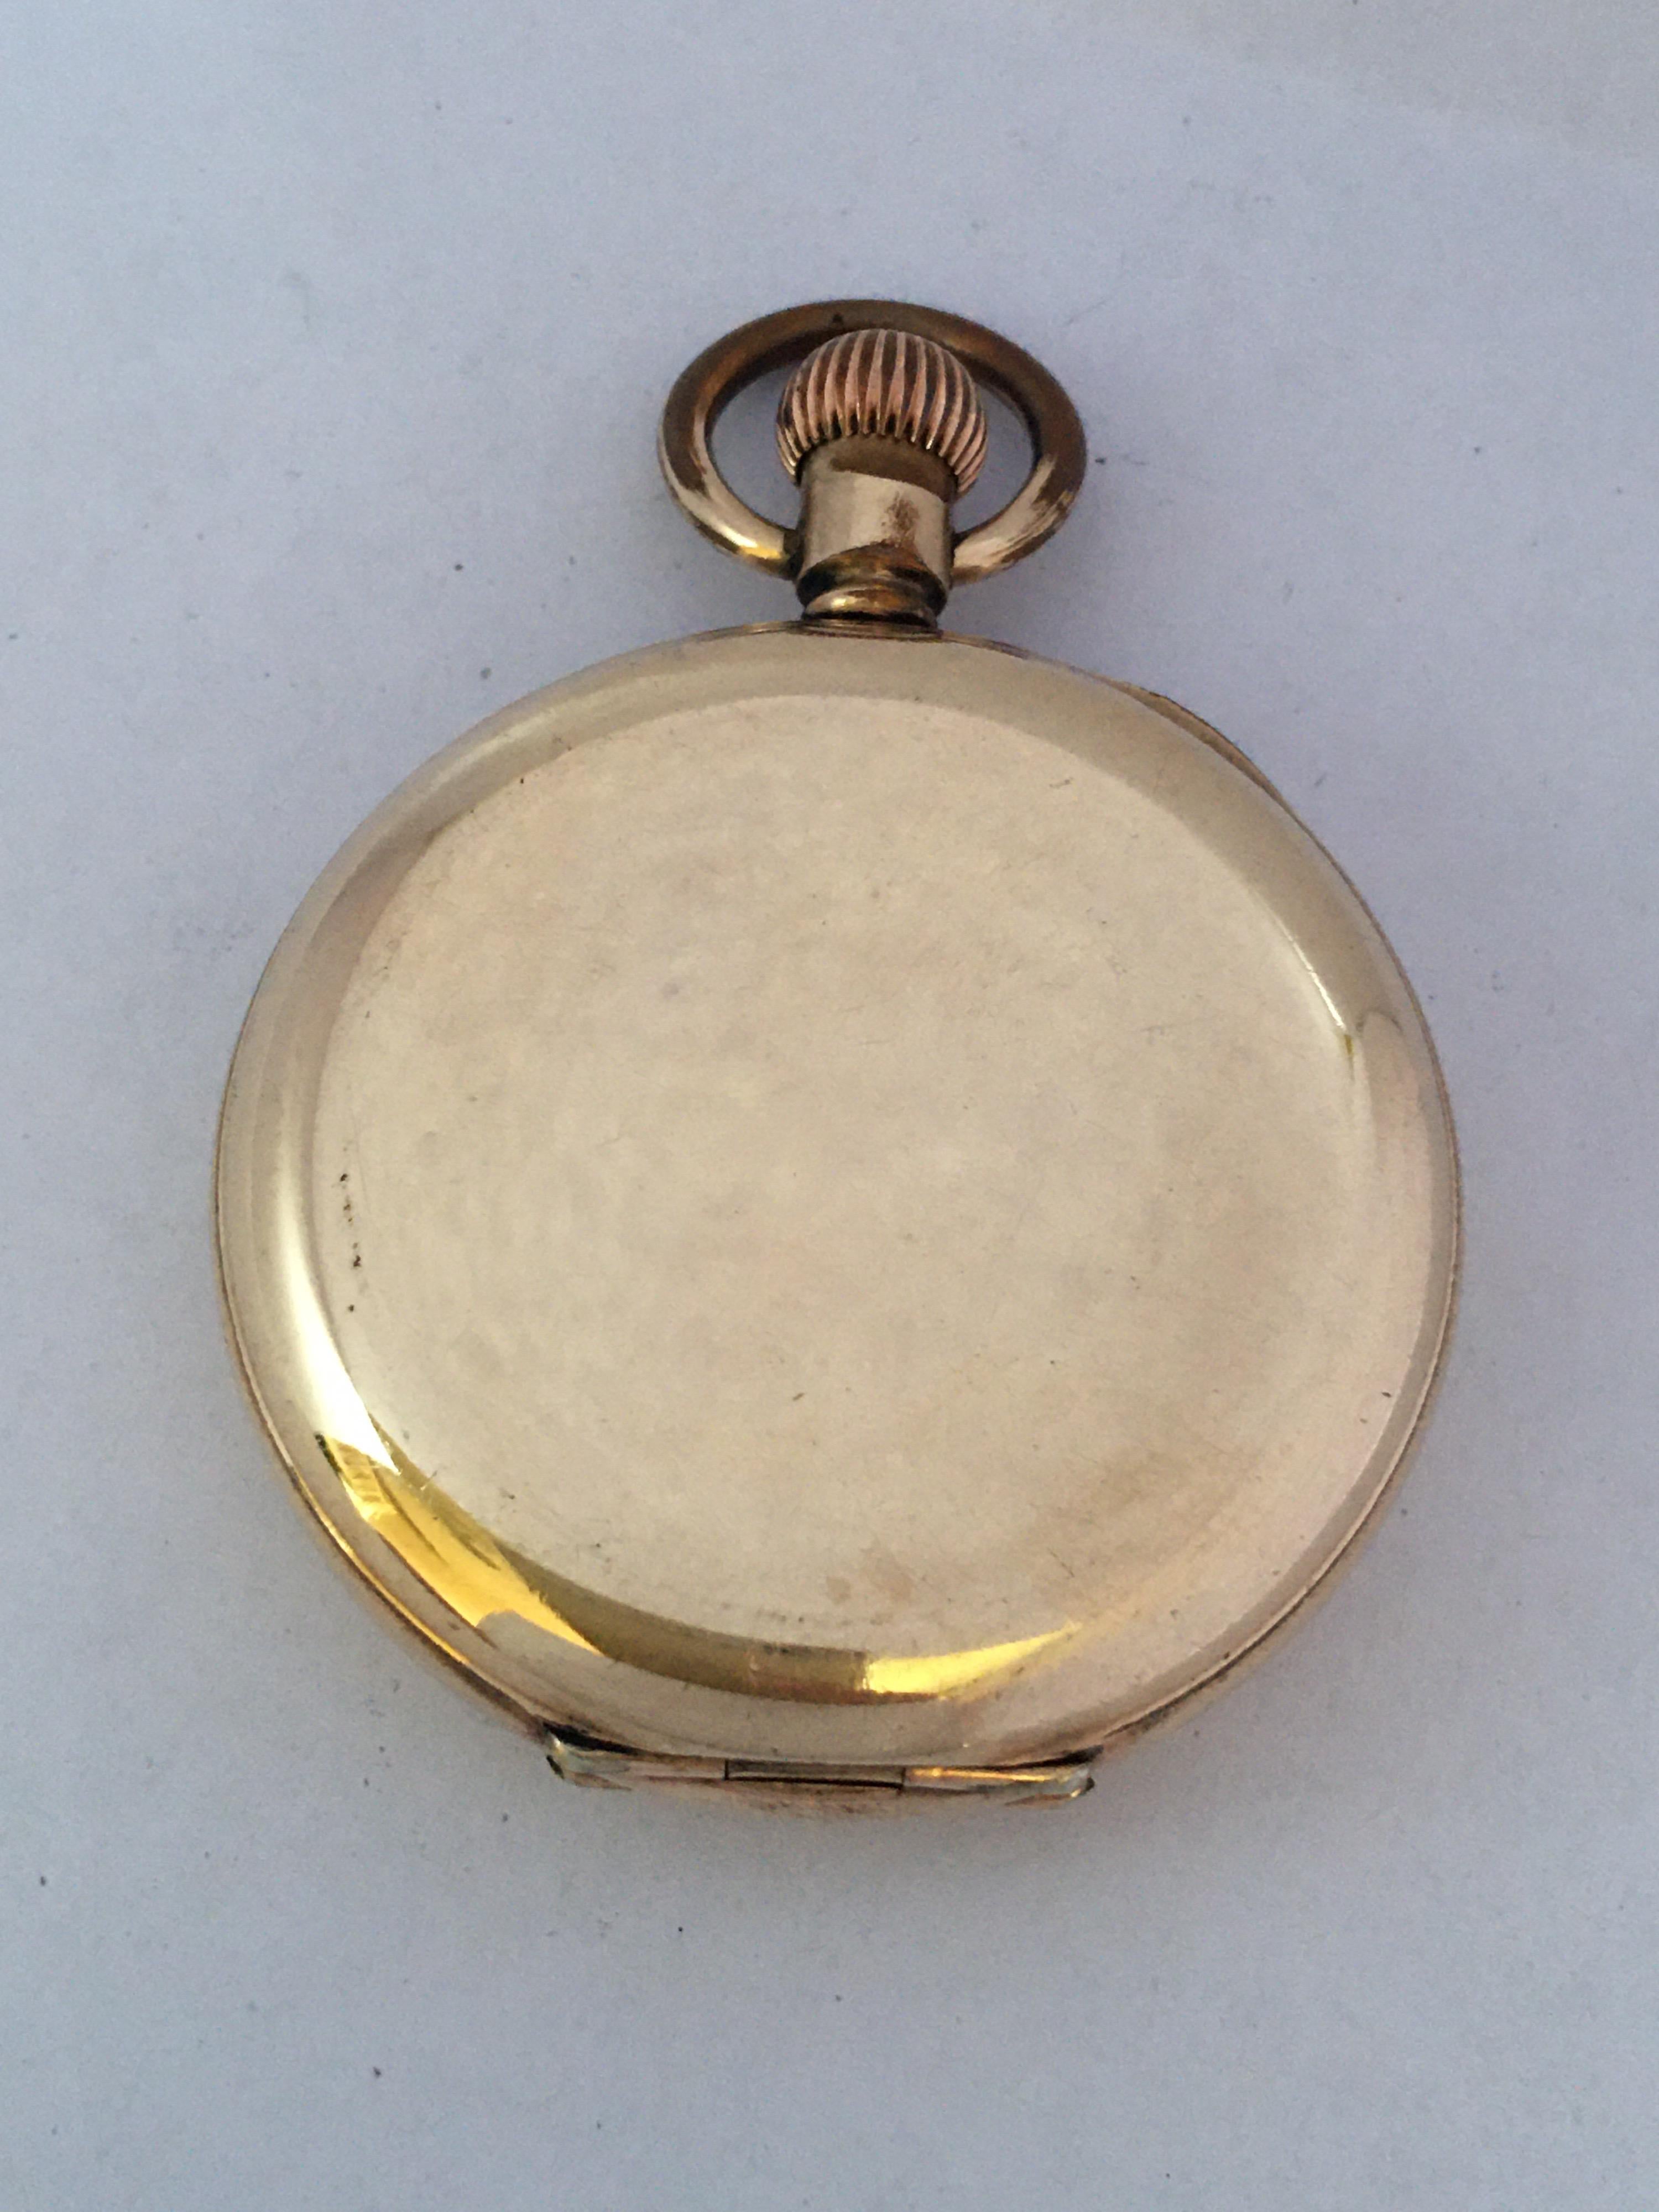 Waltham gold plated lever hunter pocket watch, circa 1914, signed 15 jewel movement with compensated balance and regulator, no. 19437305, signed dial with Roman numerals, minute track and subsidiary seconds, within a plain Elgin case, 51mm watch